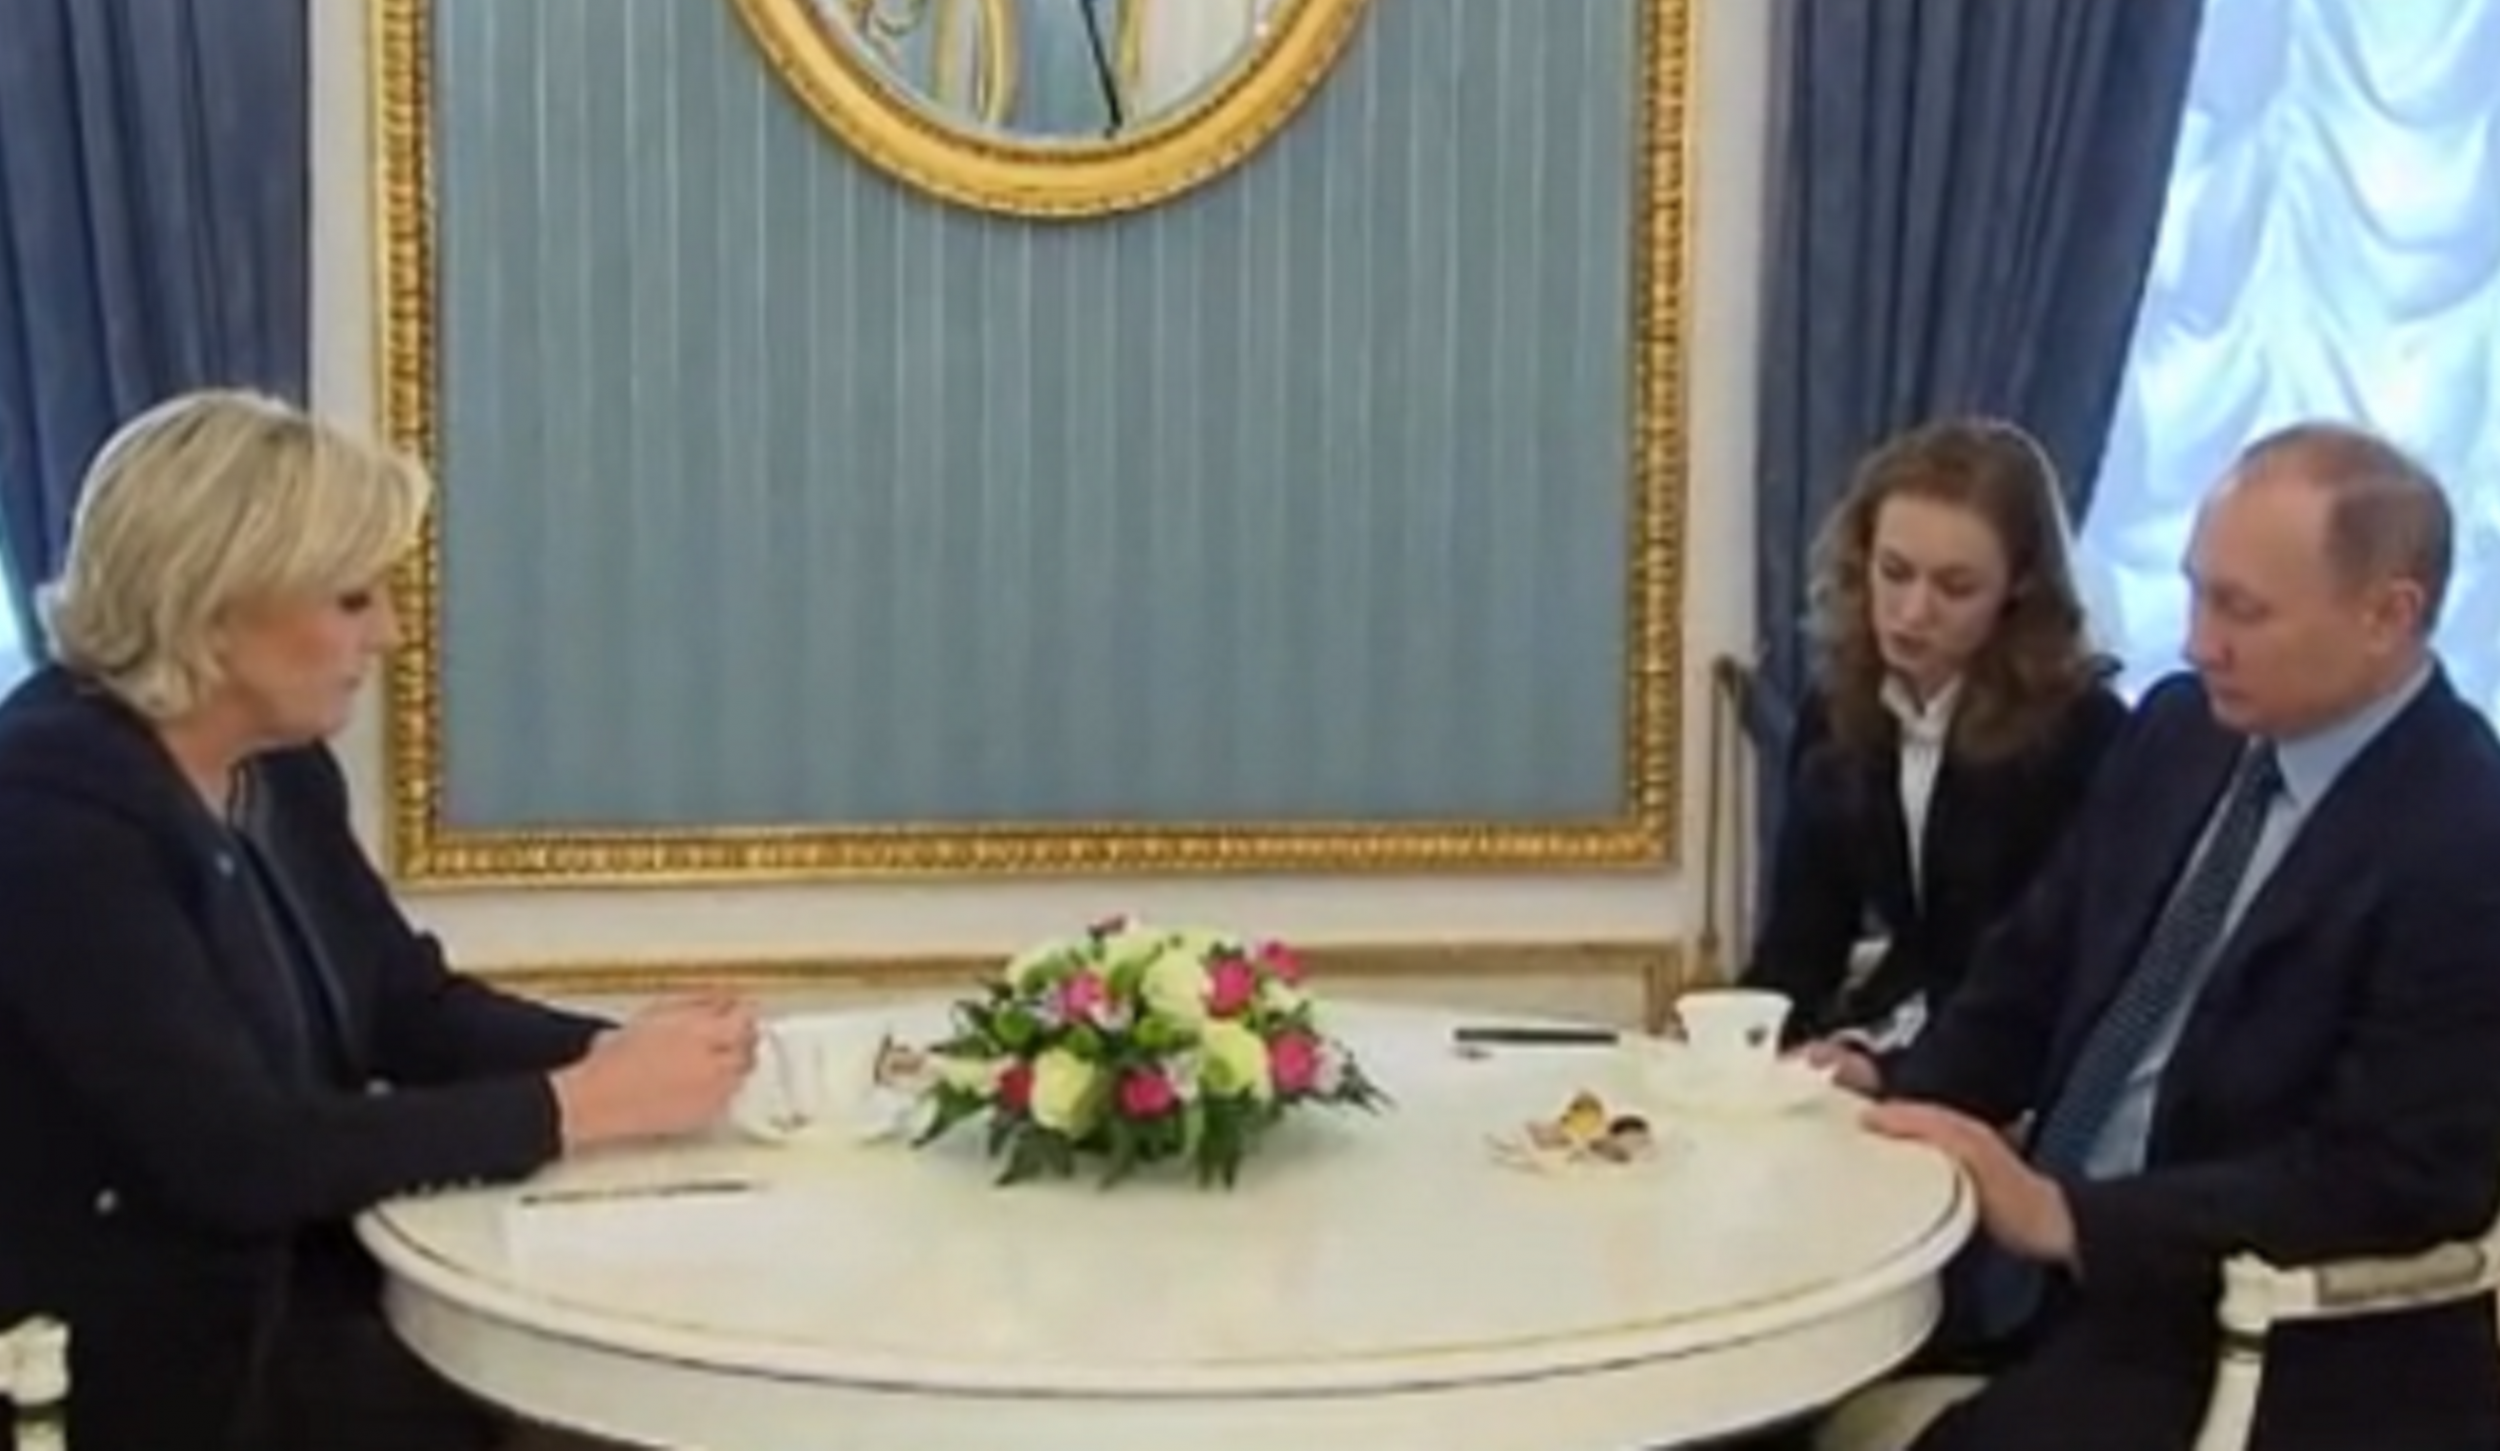 Marine Le Pen meets with Vladimir Putin in Moscow